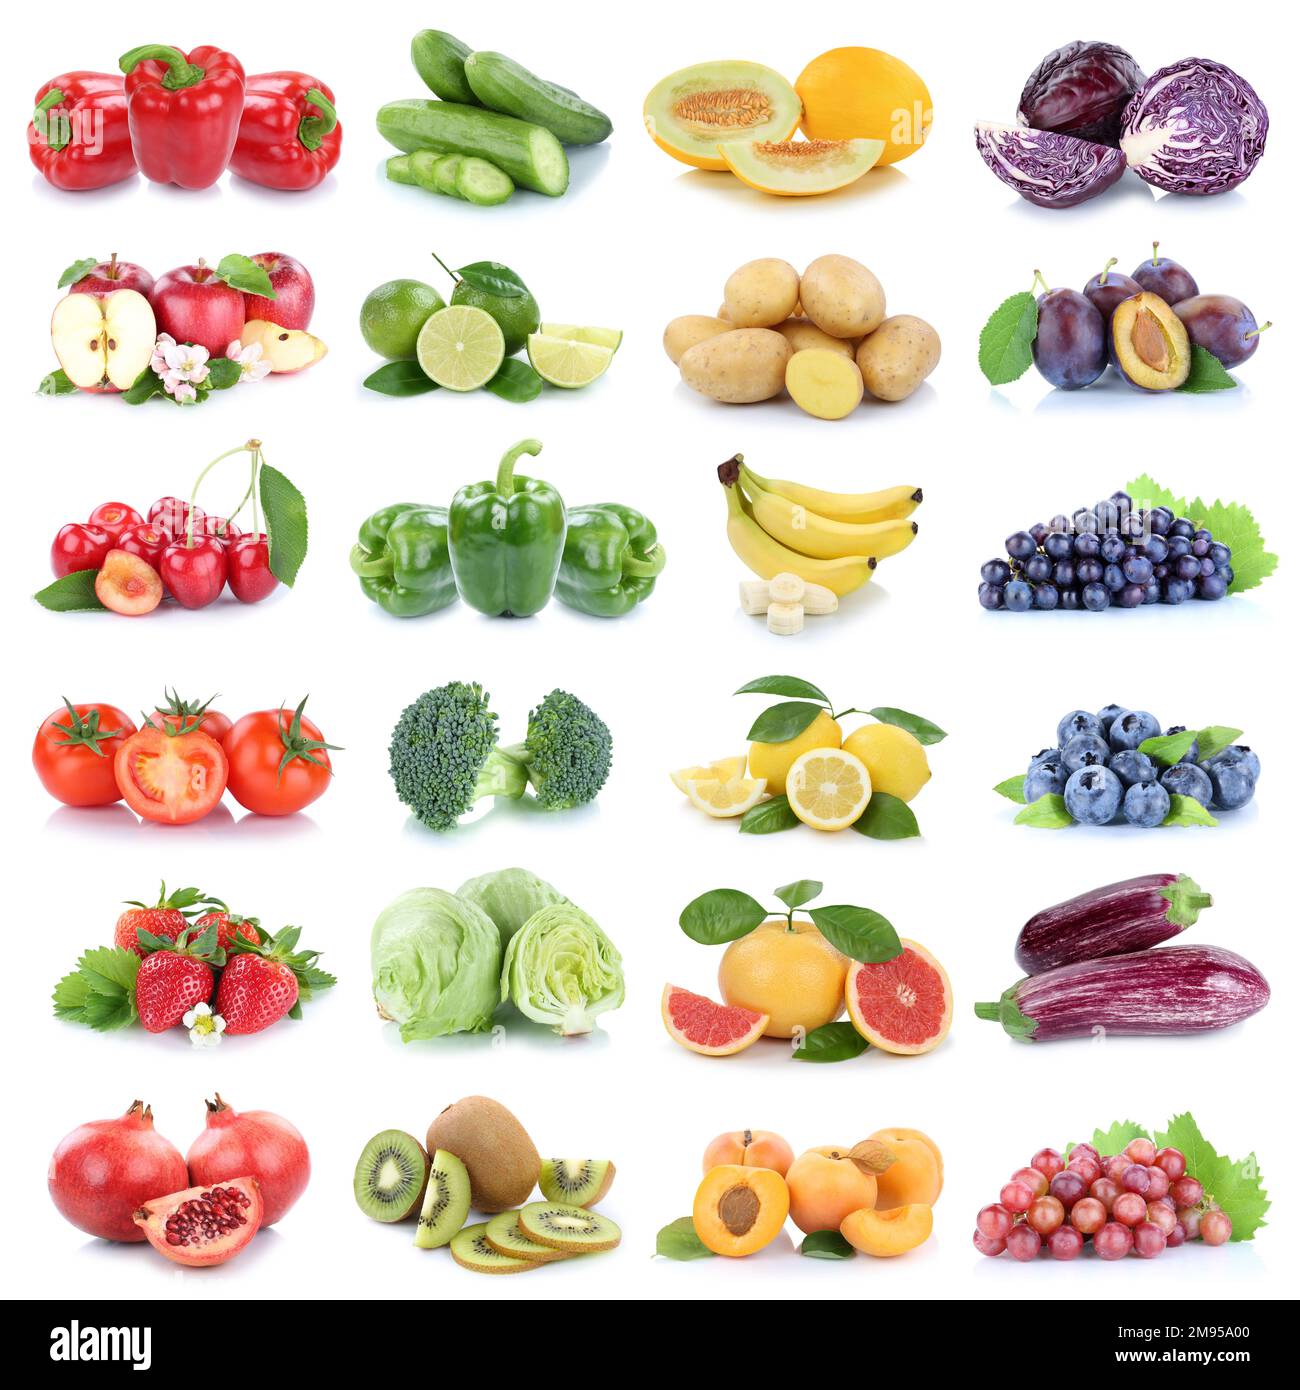 Fruits and vegetables background collection isolated on white with apple lemon tomatoes fresh fruit square collage Stock Photo